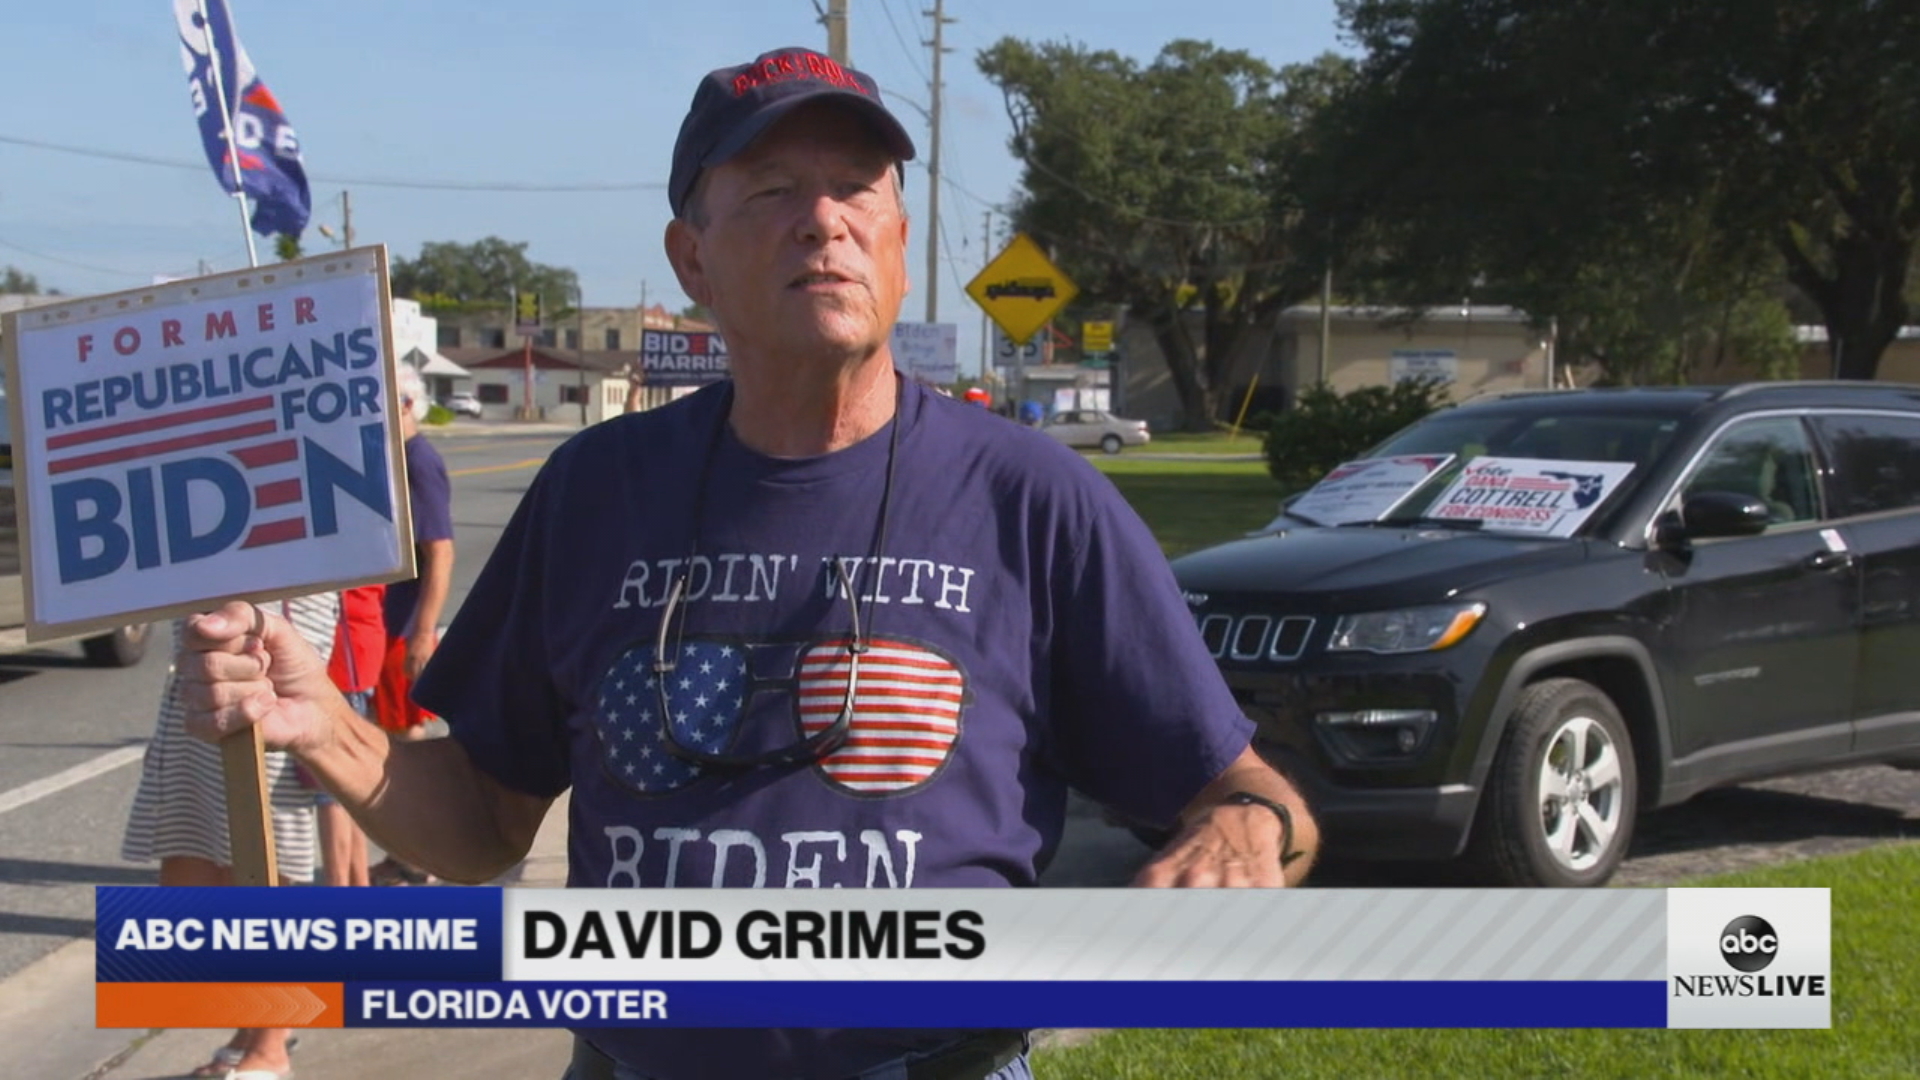 David Grimes is seen here with a "Former Republicans for Biden" sign.